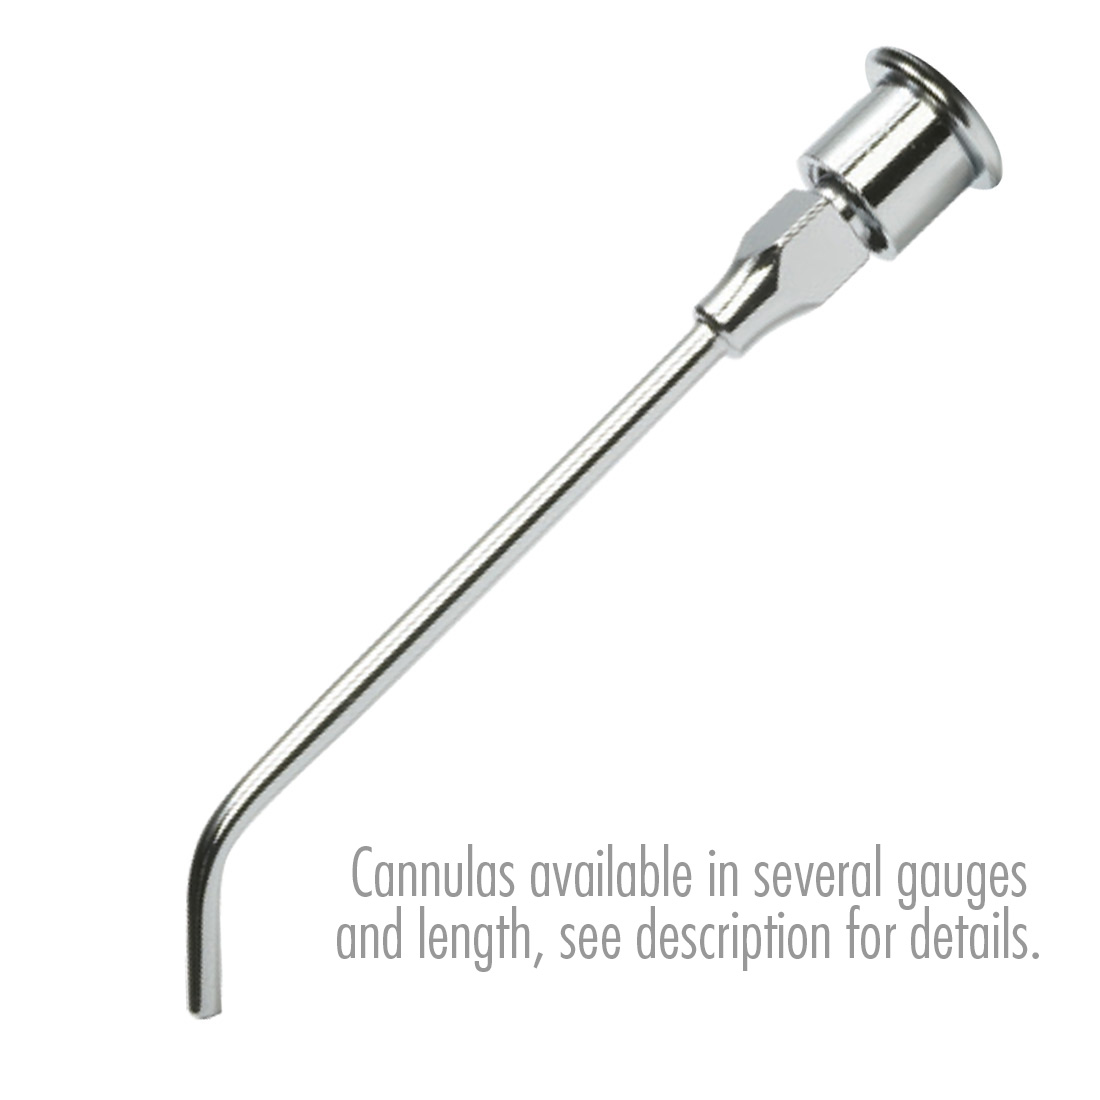 ACE Irrigation Cannula - Stainless Steel 12G x 3", 45 degree angle